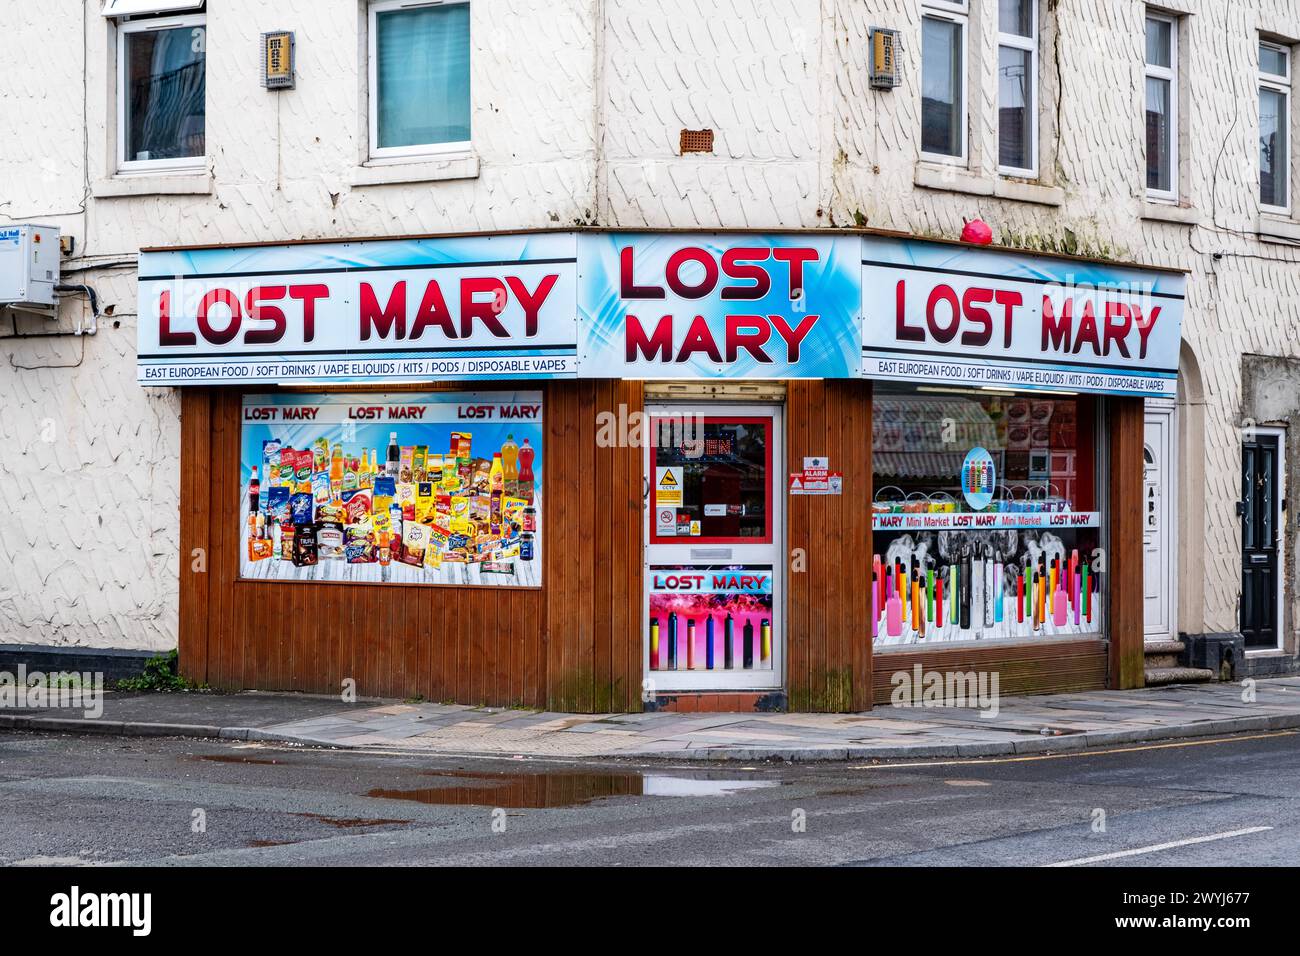 Lost Mary, East European convenience shop in Crewe Cheshire UK Stock Photo